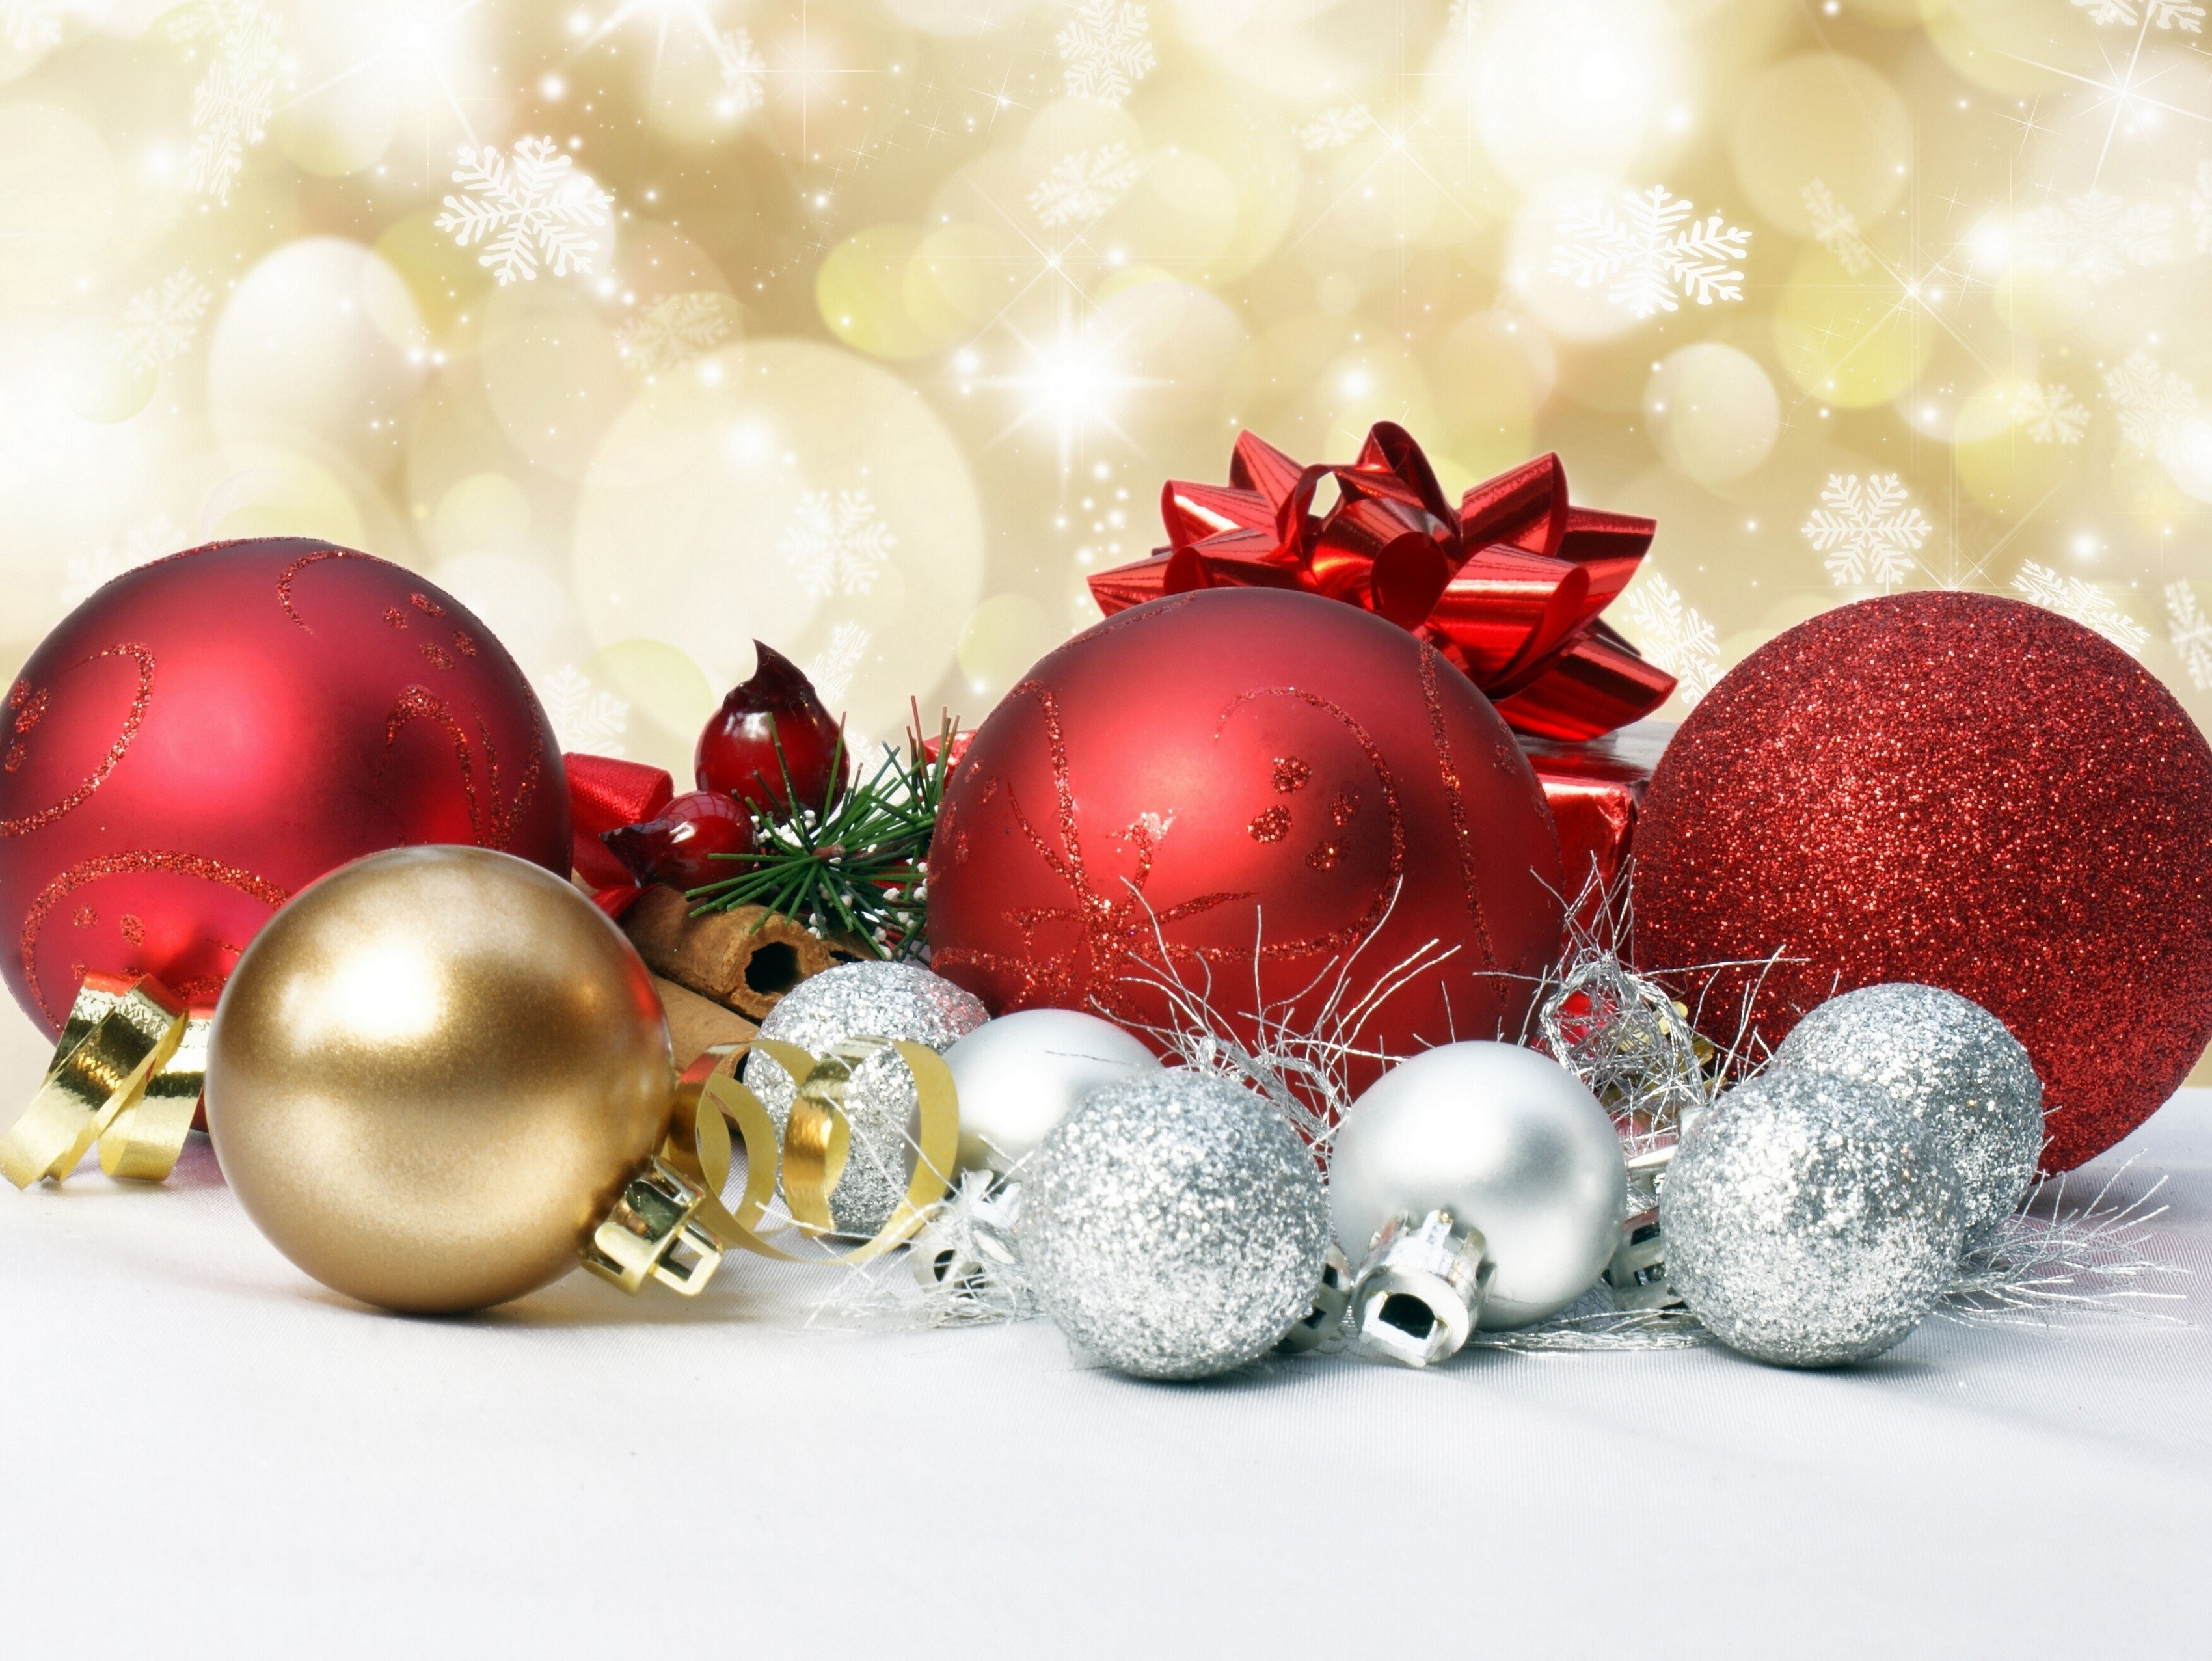 Holidays, Christmas, Balls, Red, Silver color Gallery HD Wallpaper